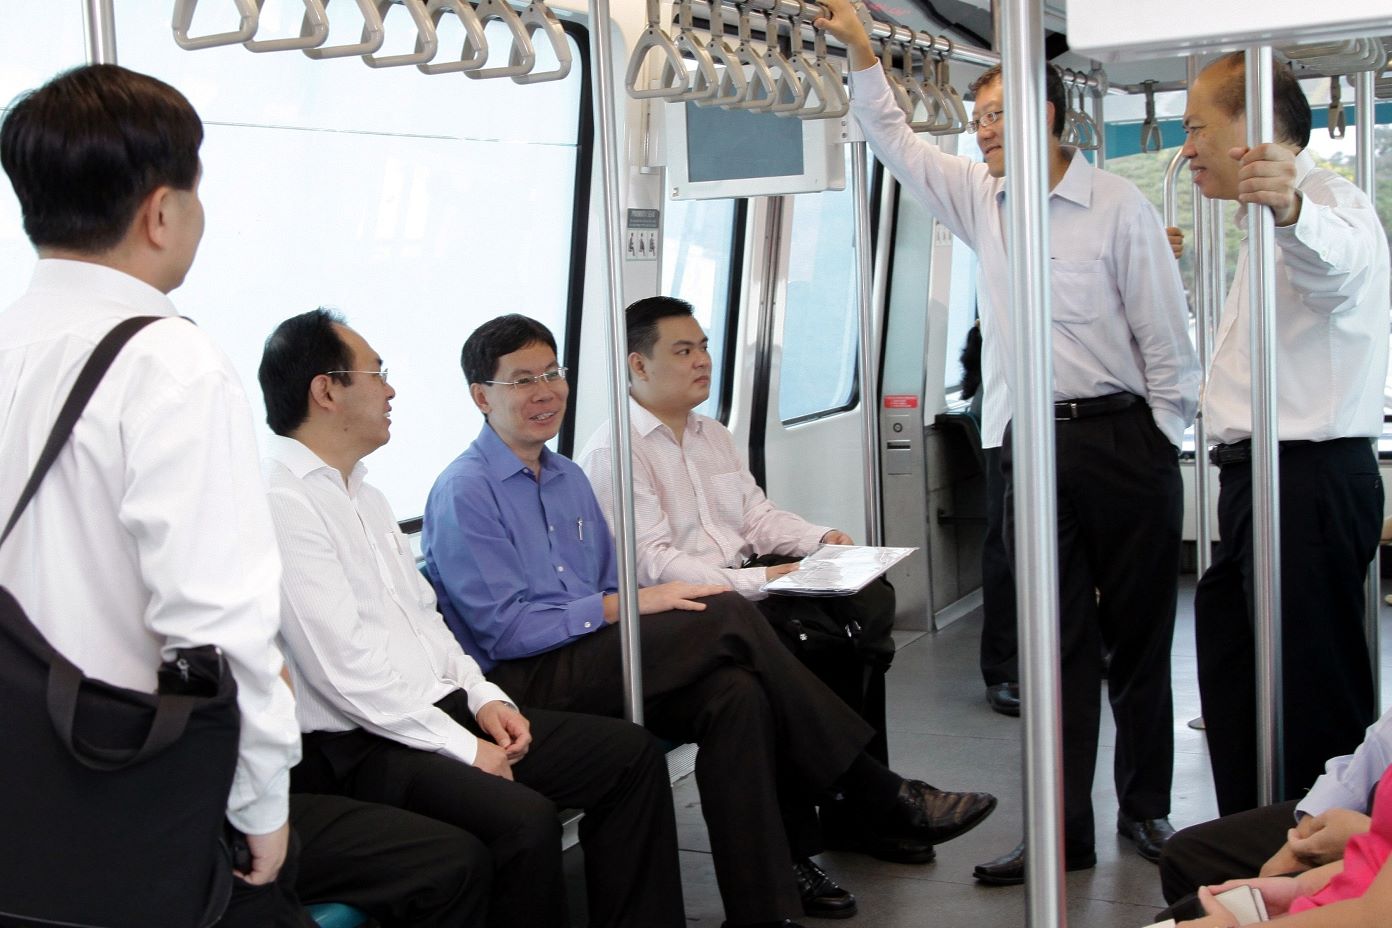 MP Liang Eng Hwa (left in white shirt) with Transport Minister Lui Tuck Yew. Source: Liang Eng Hwa FB